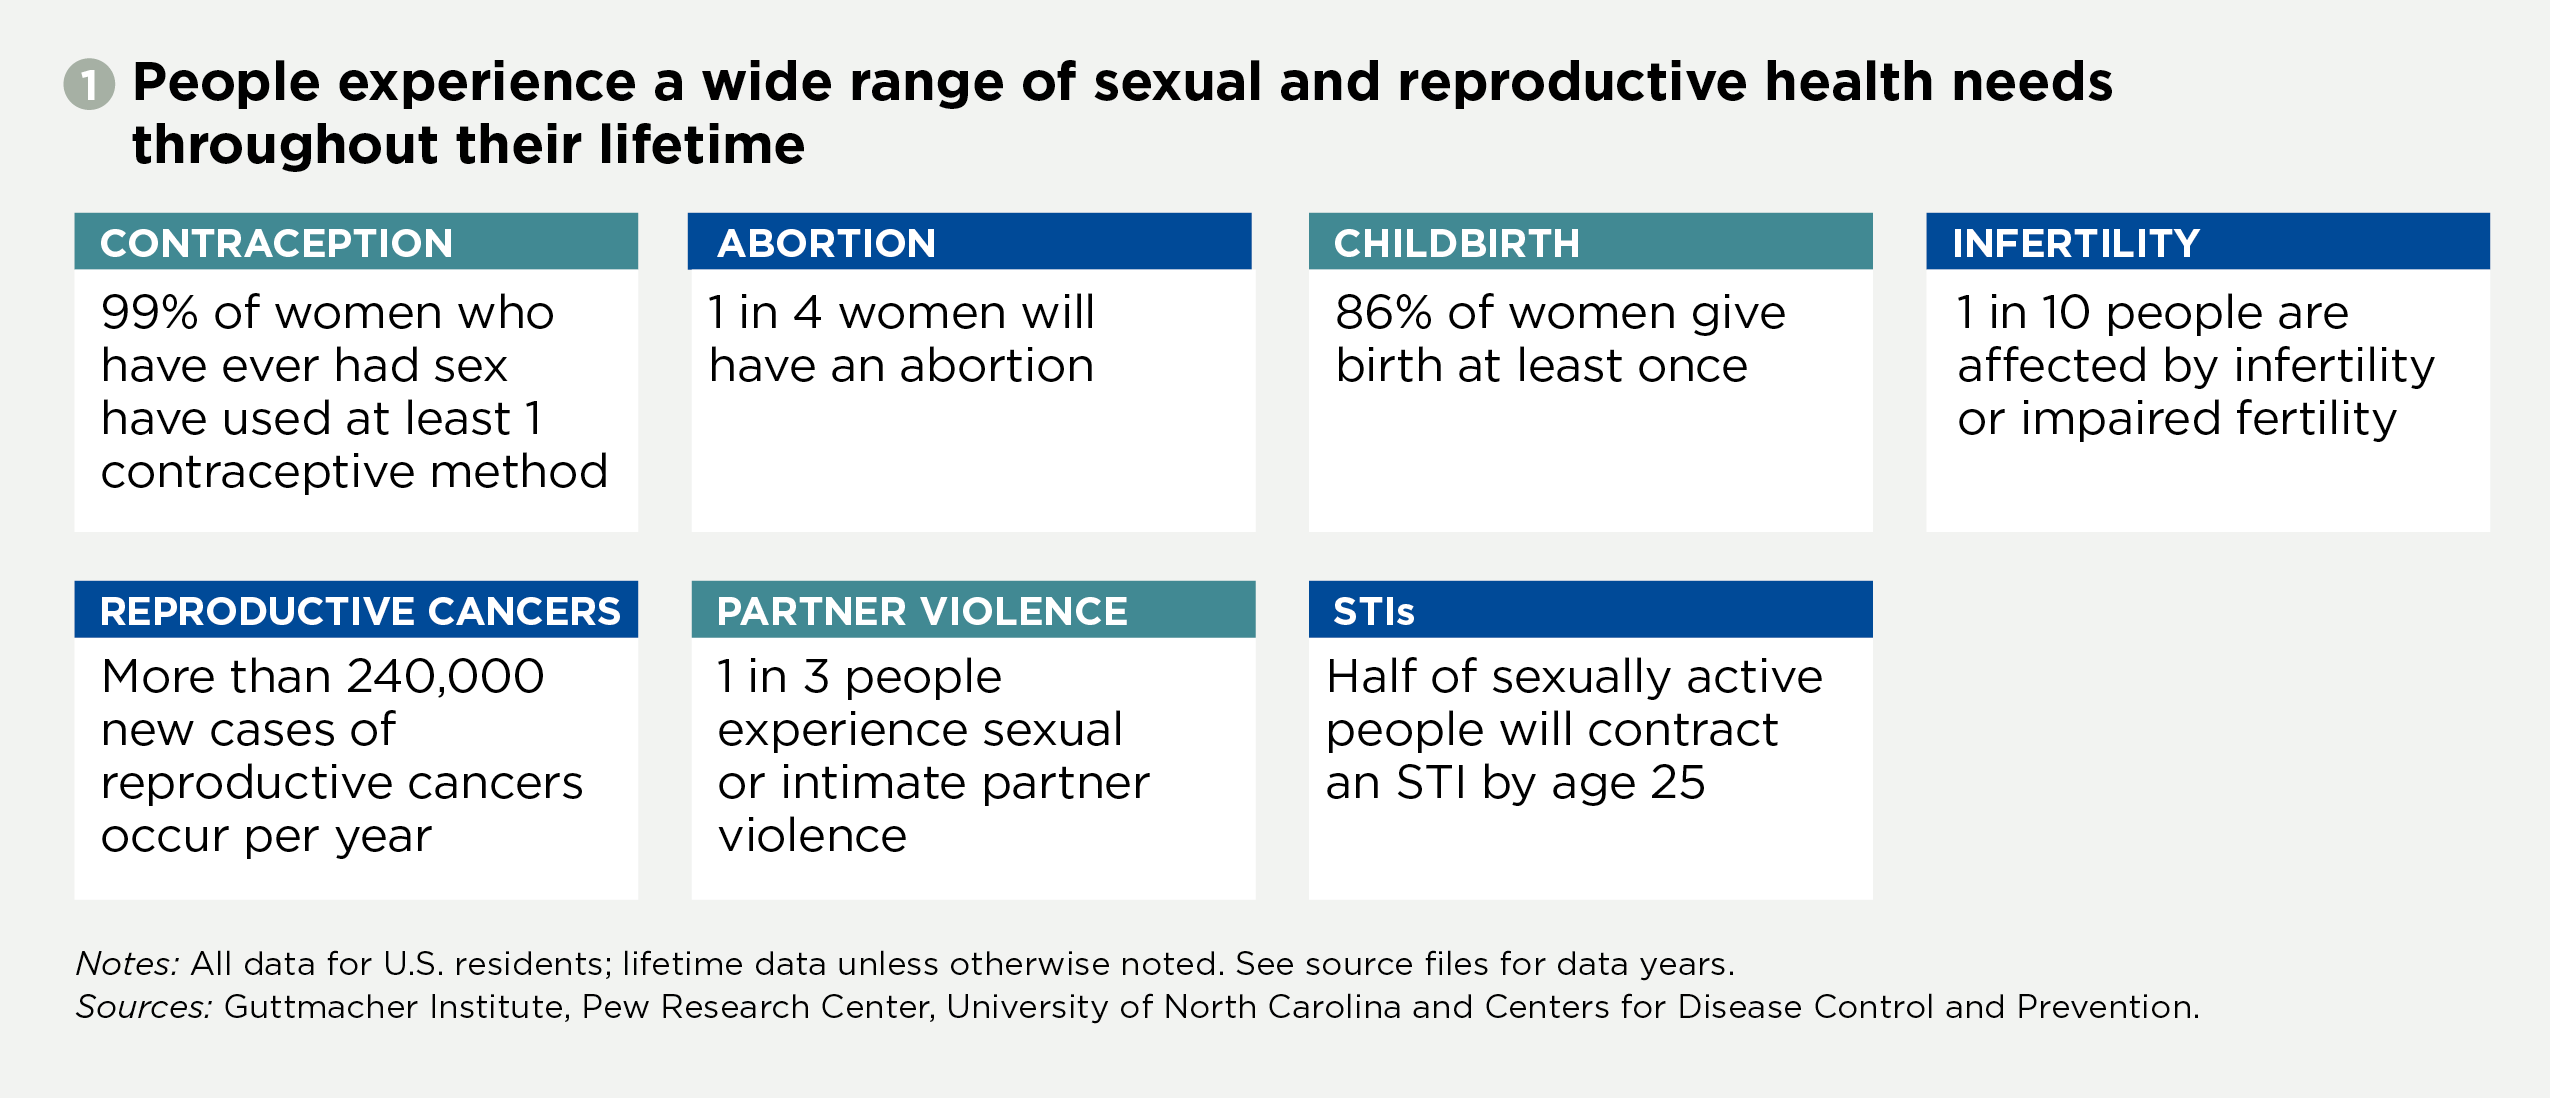 More To Be Done Individuals Needs For Sexual And Reproductive Health Coverage And Care